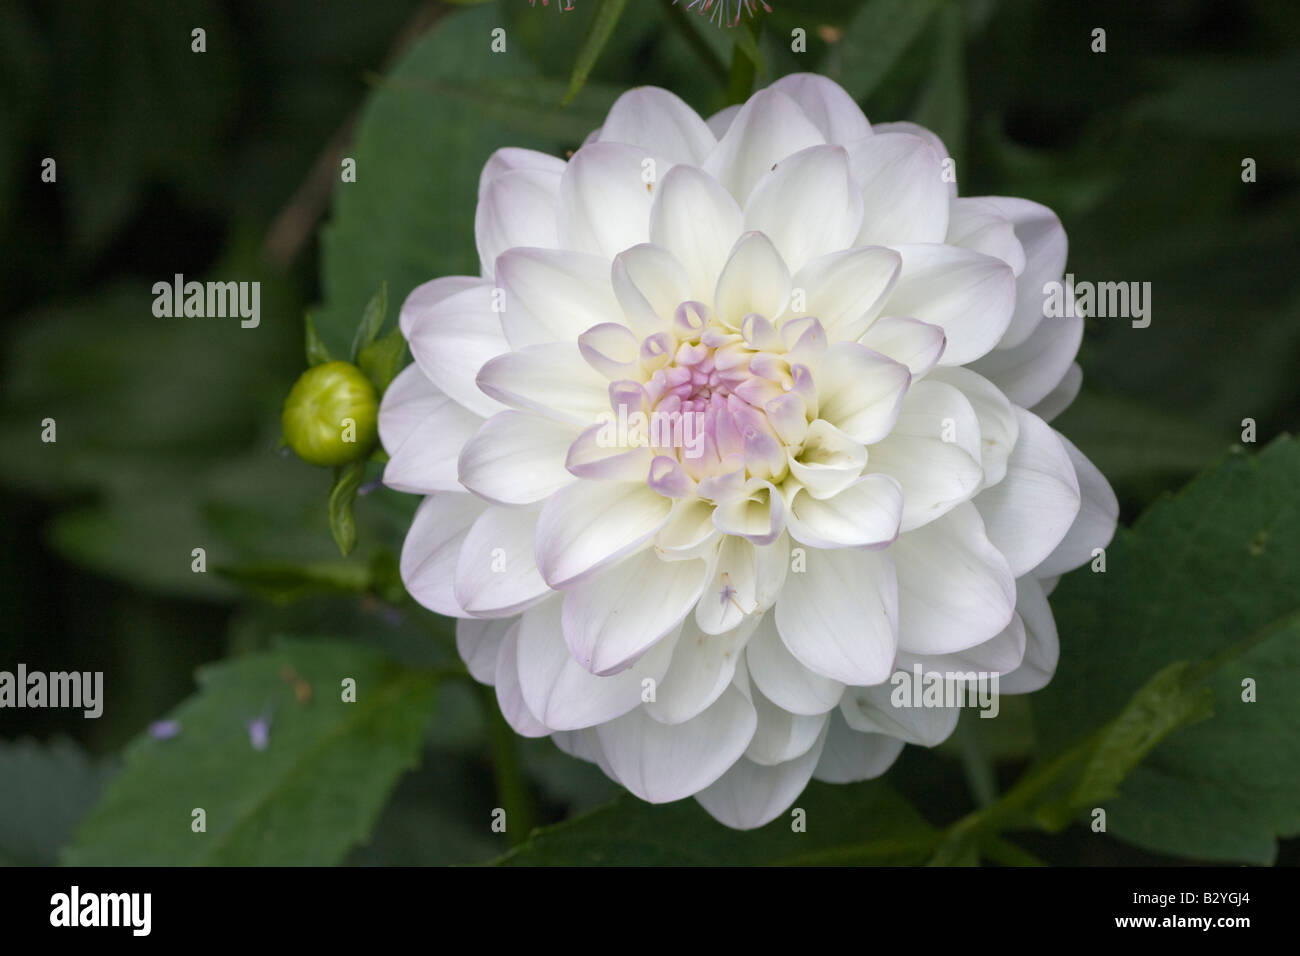 The white and lilac flower of dahlia Eveline July 2008 Stock Photo